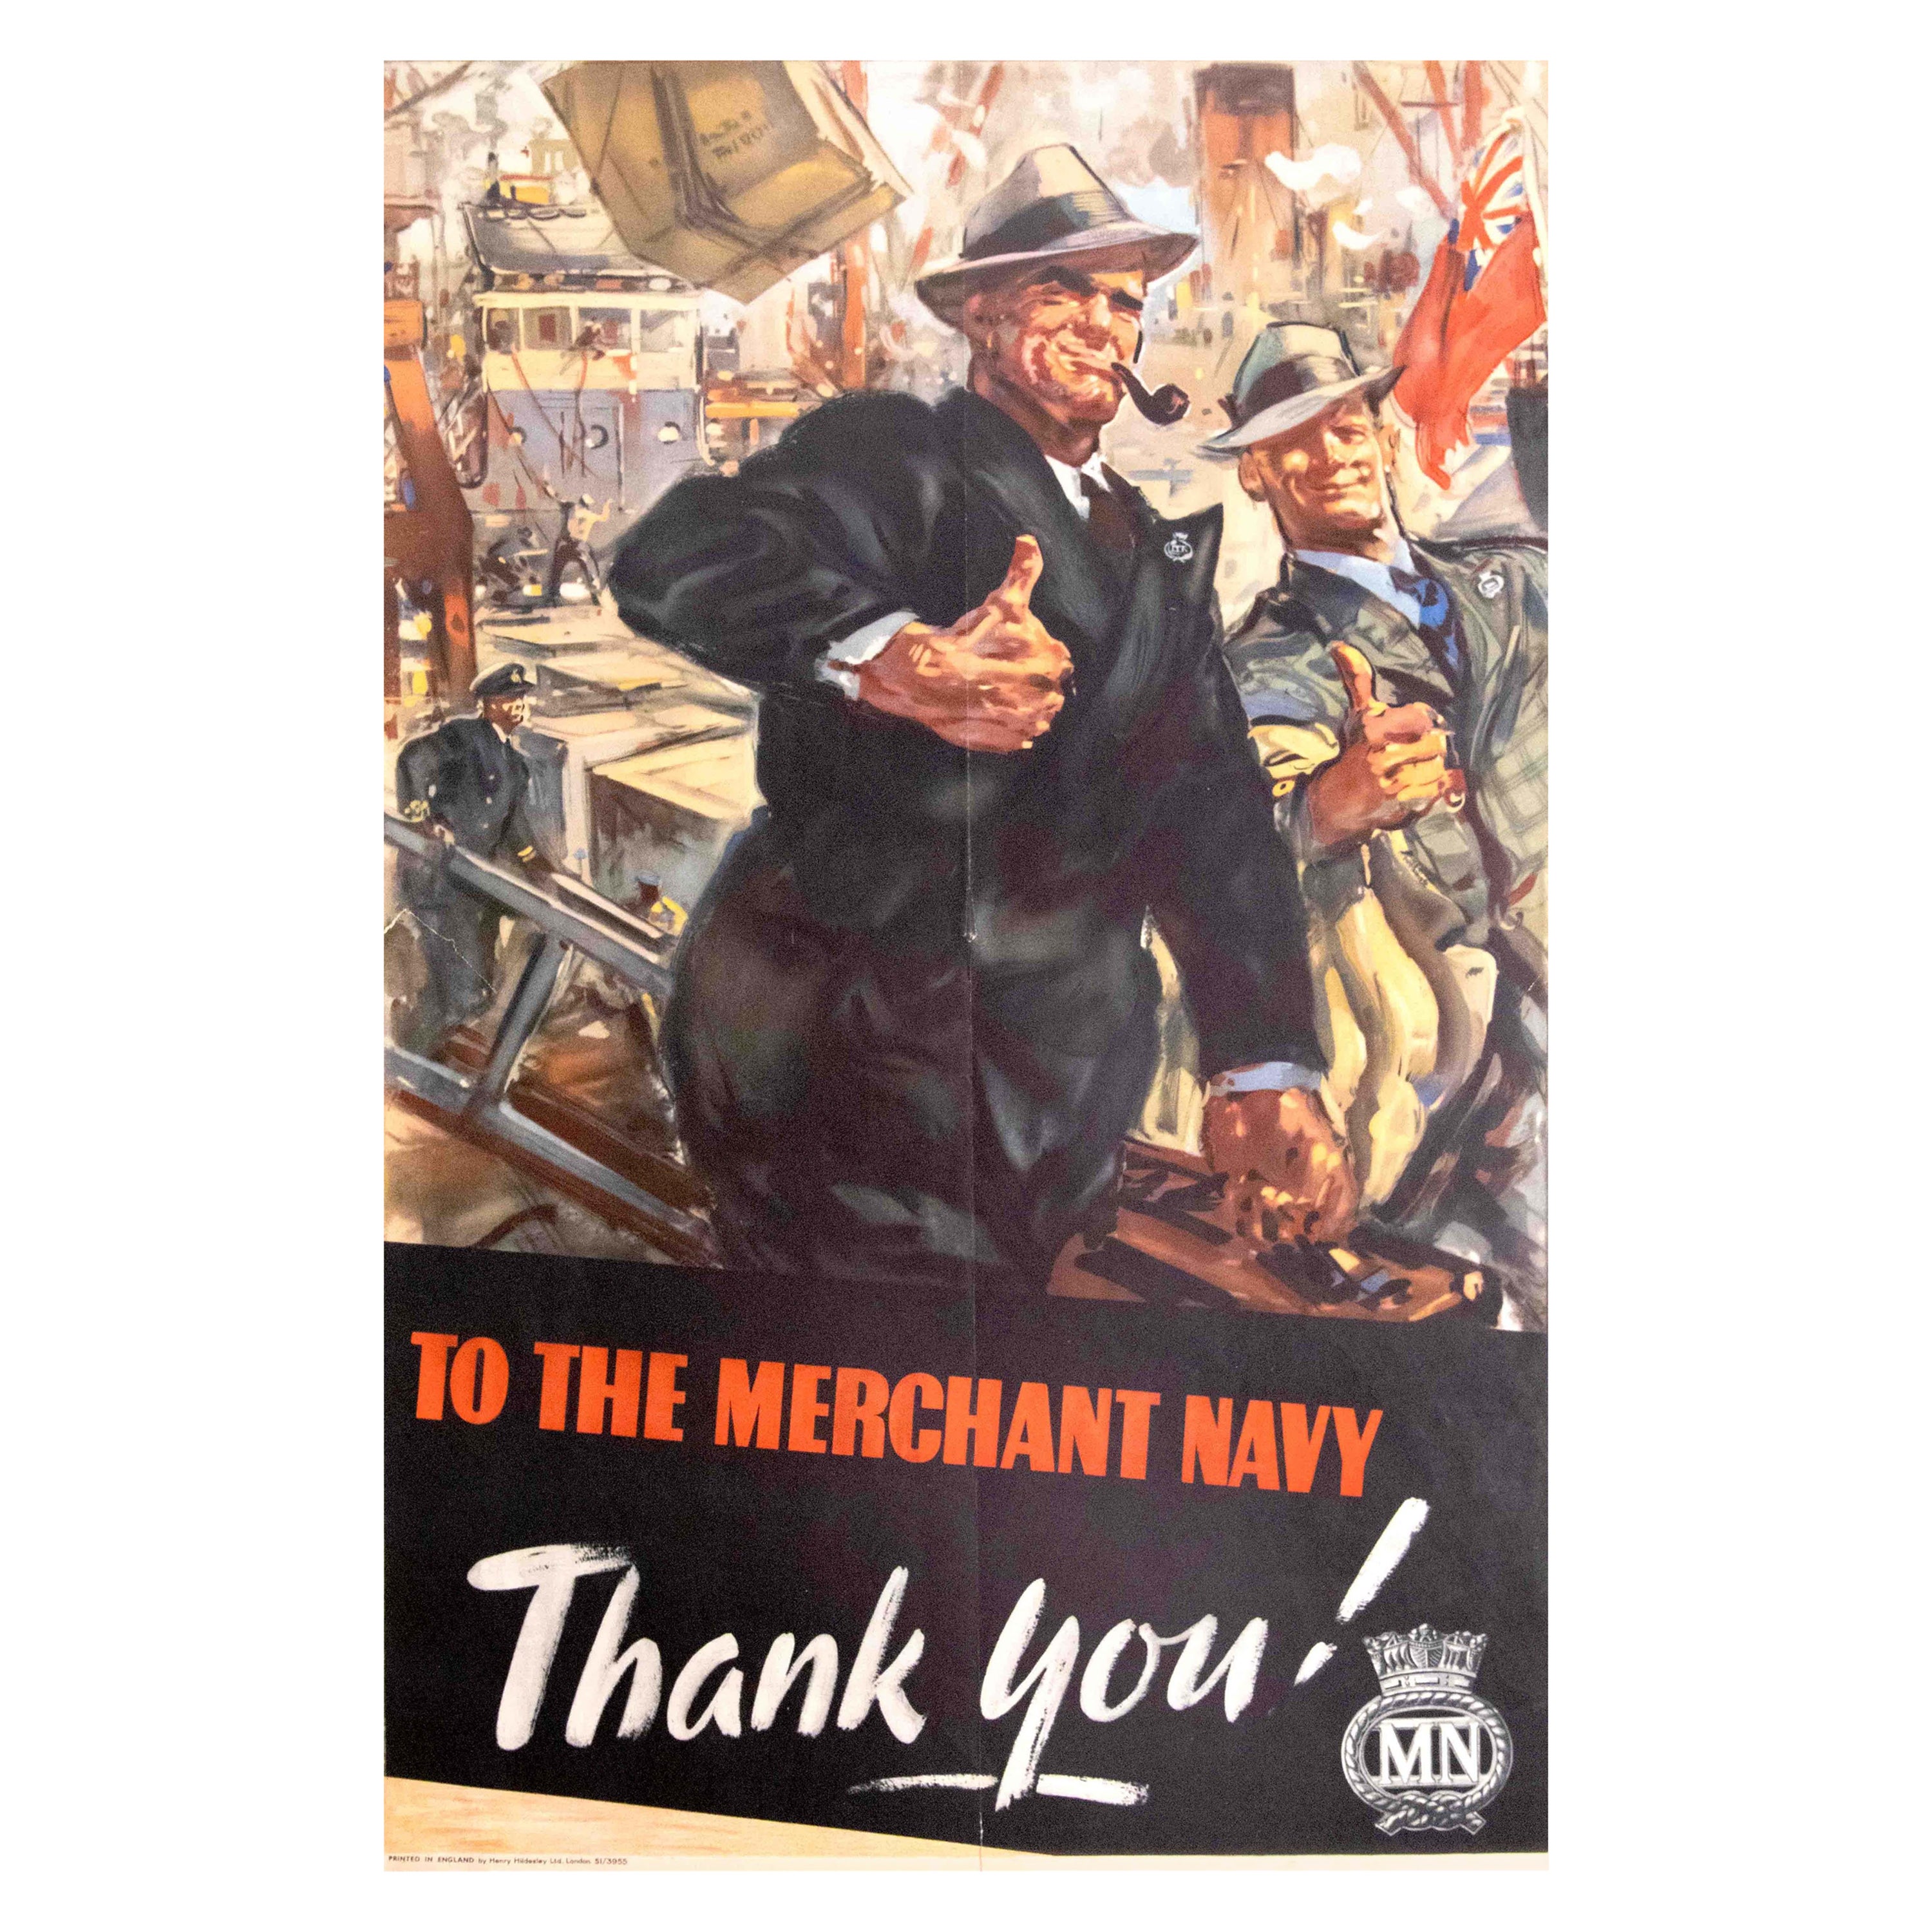 Original Vintage Poster To The Merchant Navy Thank You WWII Thumbs Up Artwork For Sale